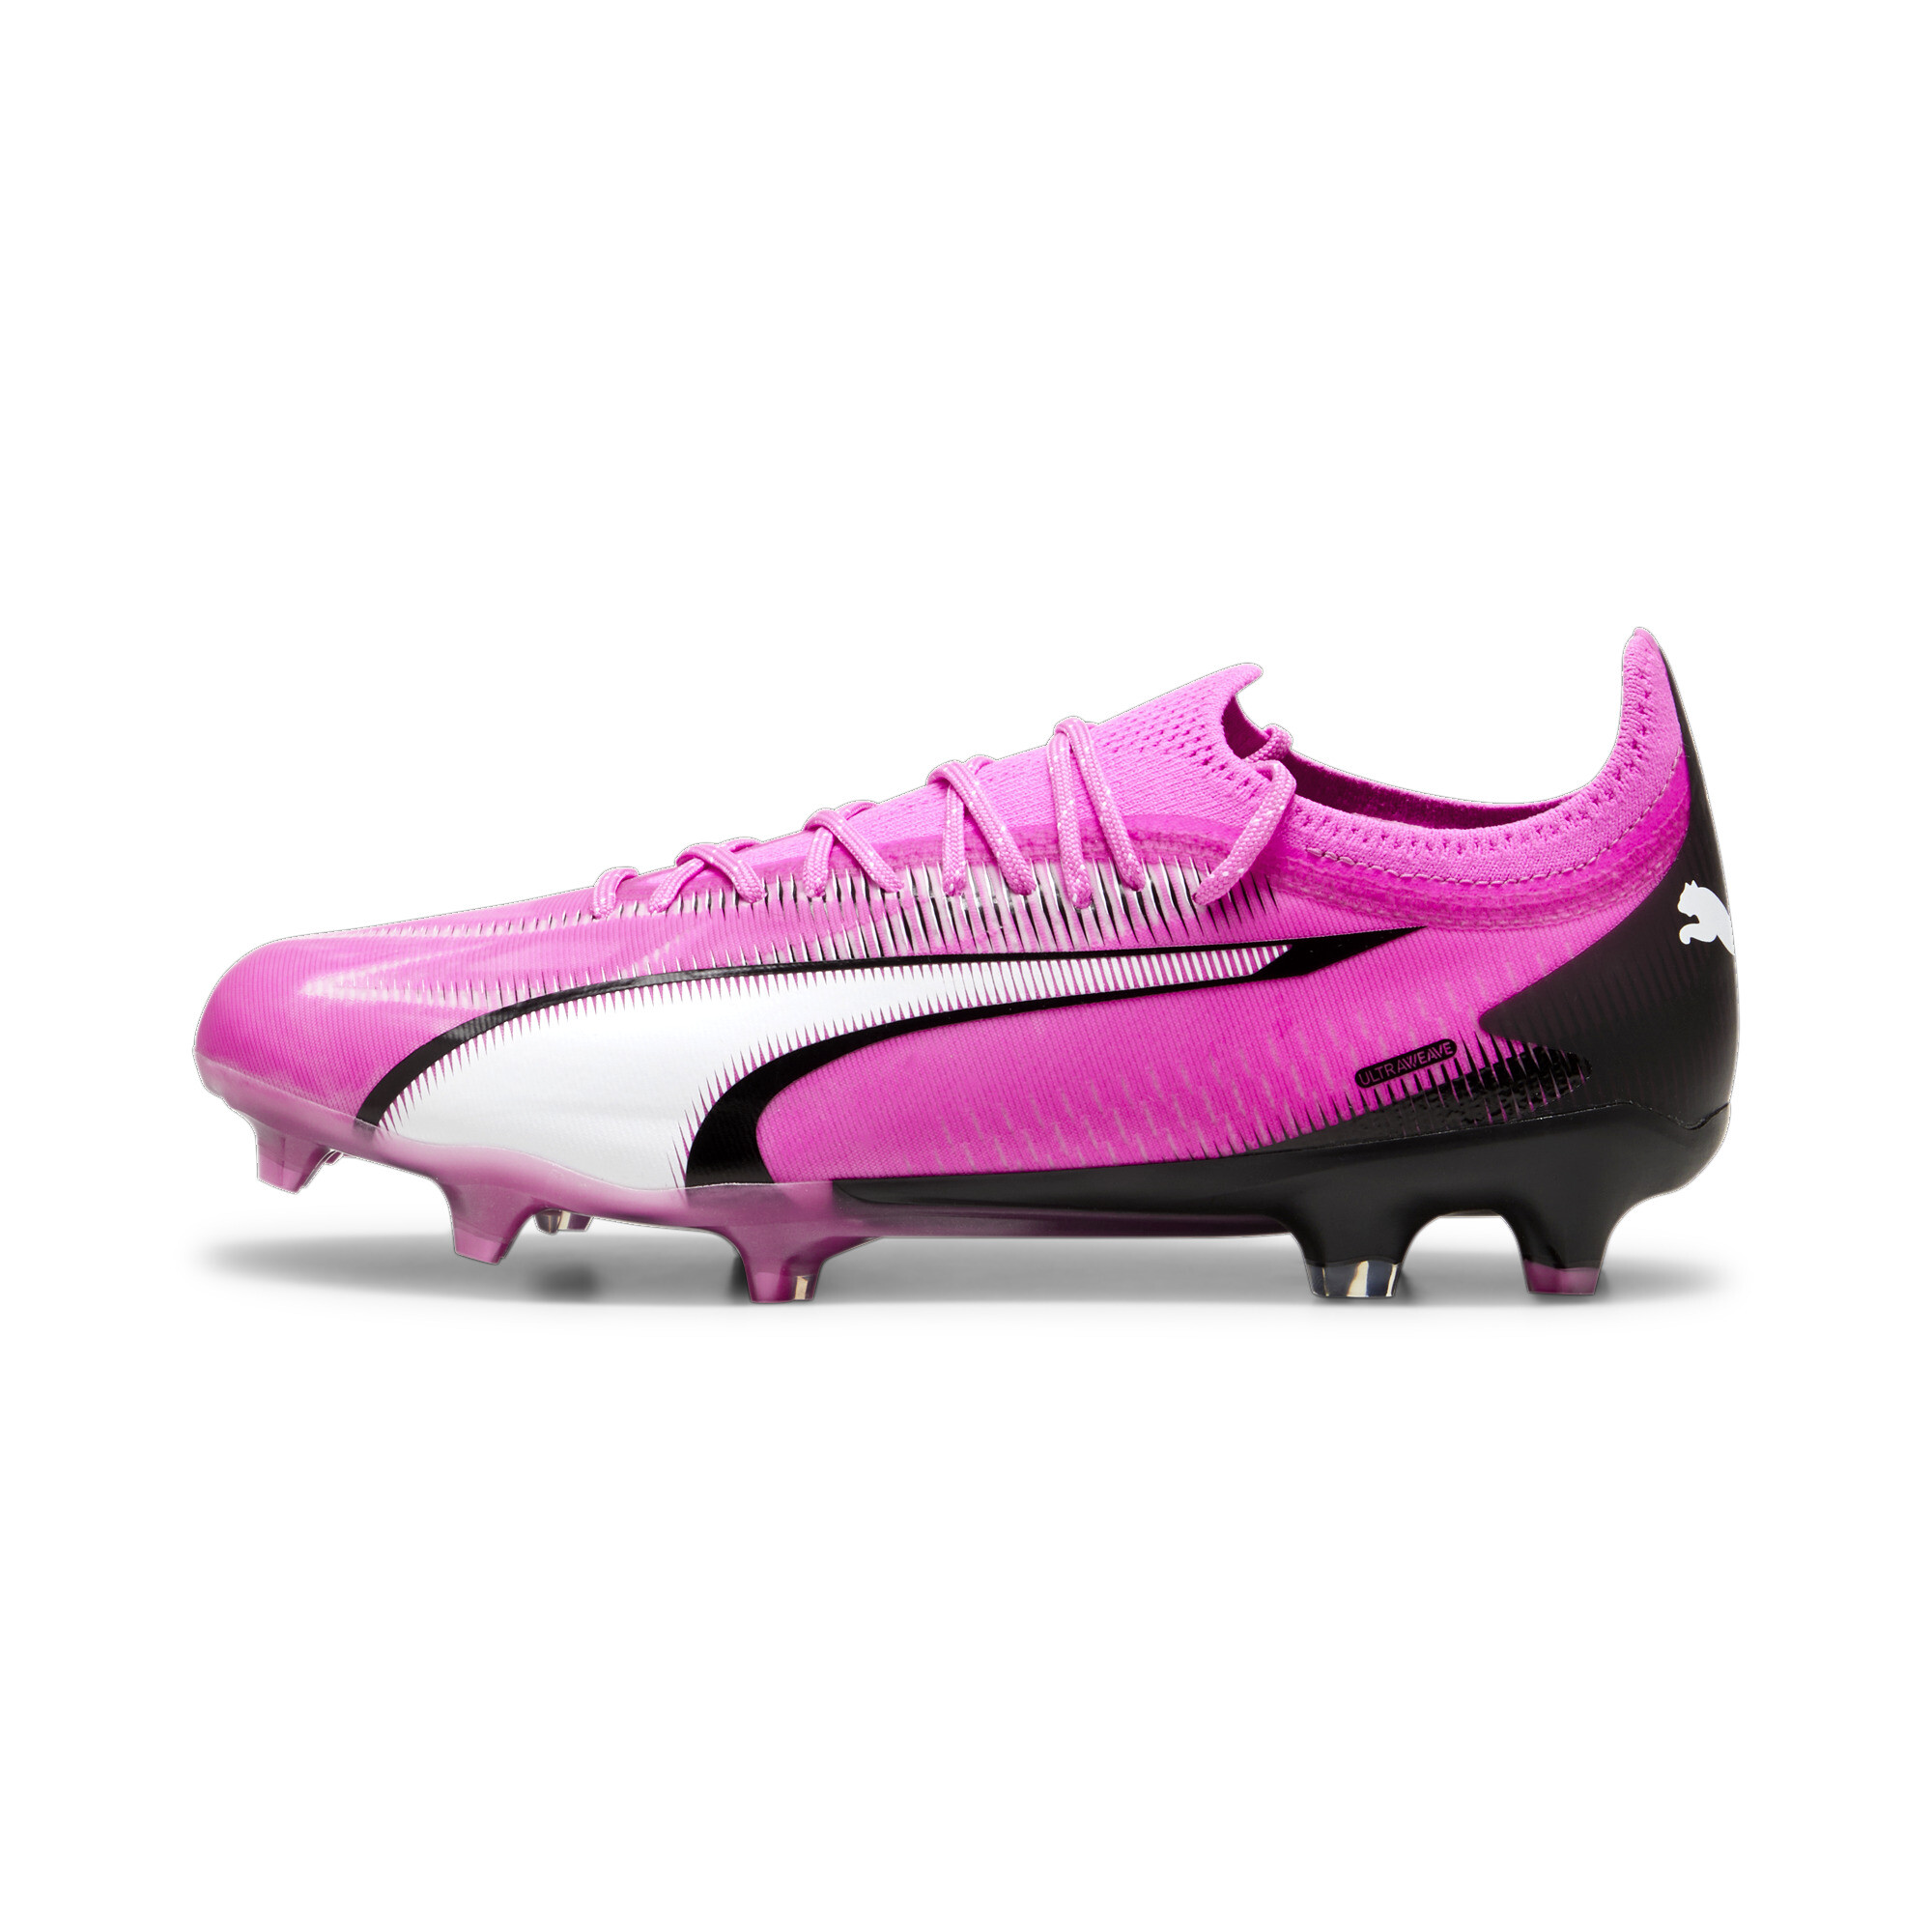 Puma ULTRA ULTIMATE FG/AG Football Boots, Pink, Size 37.5, Shoes